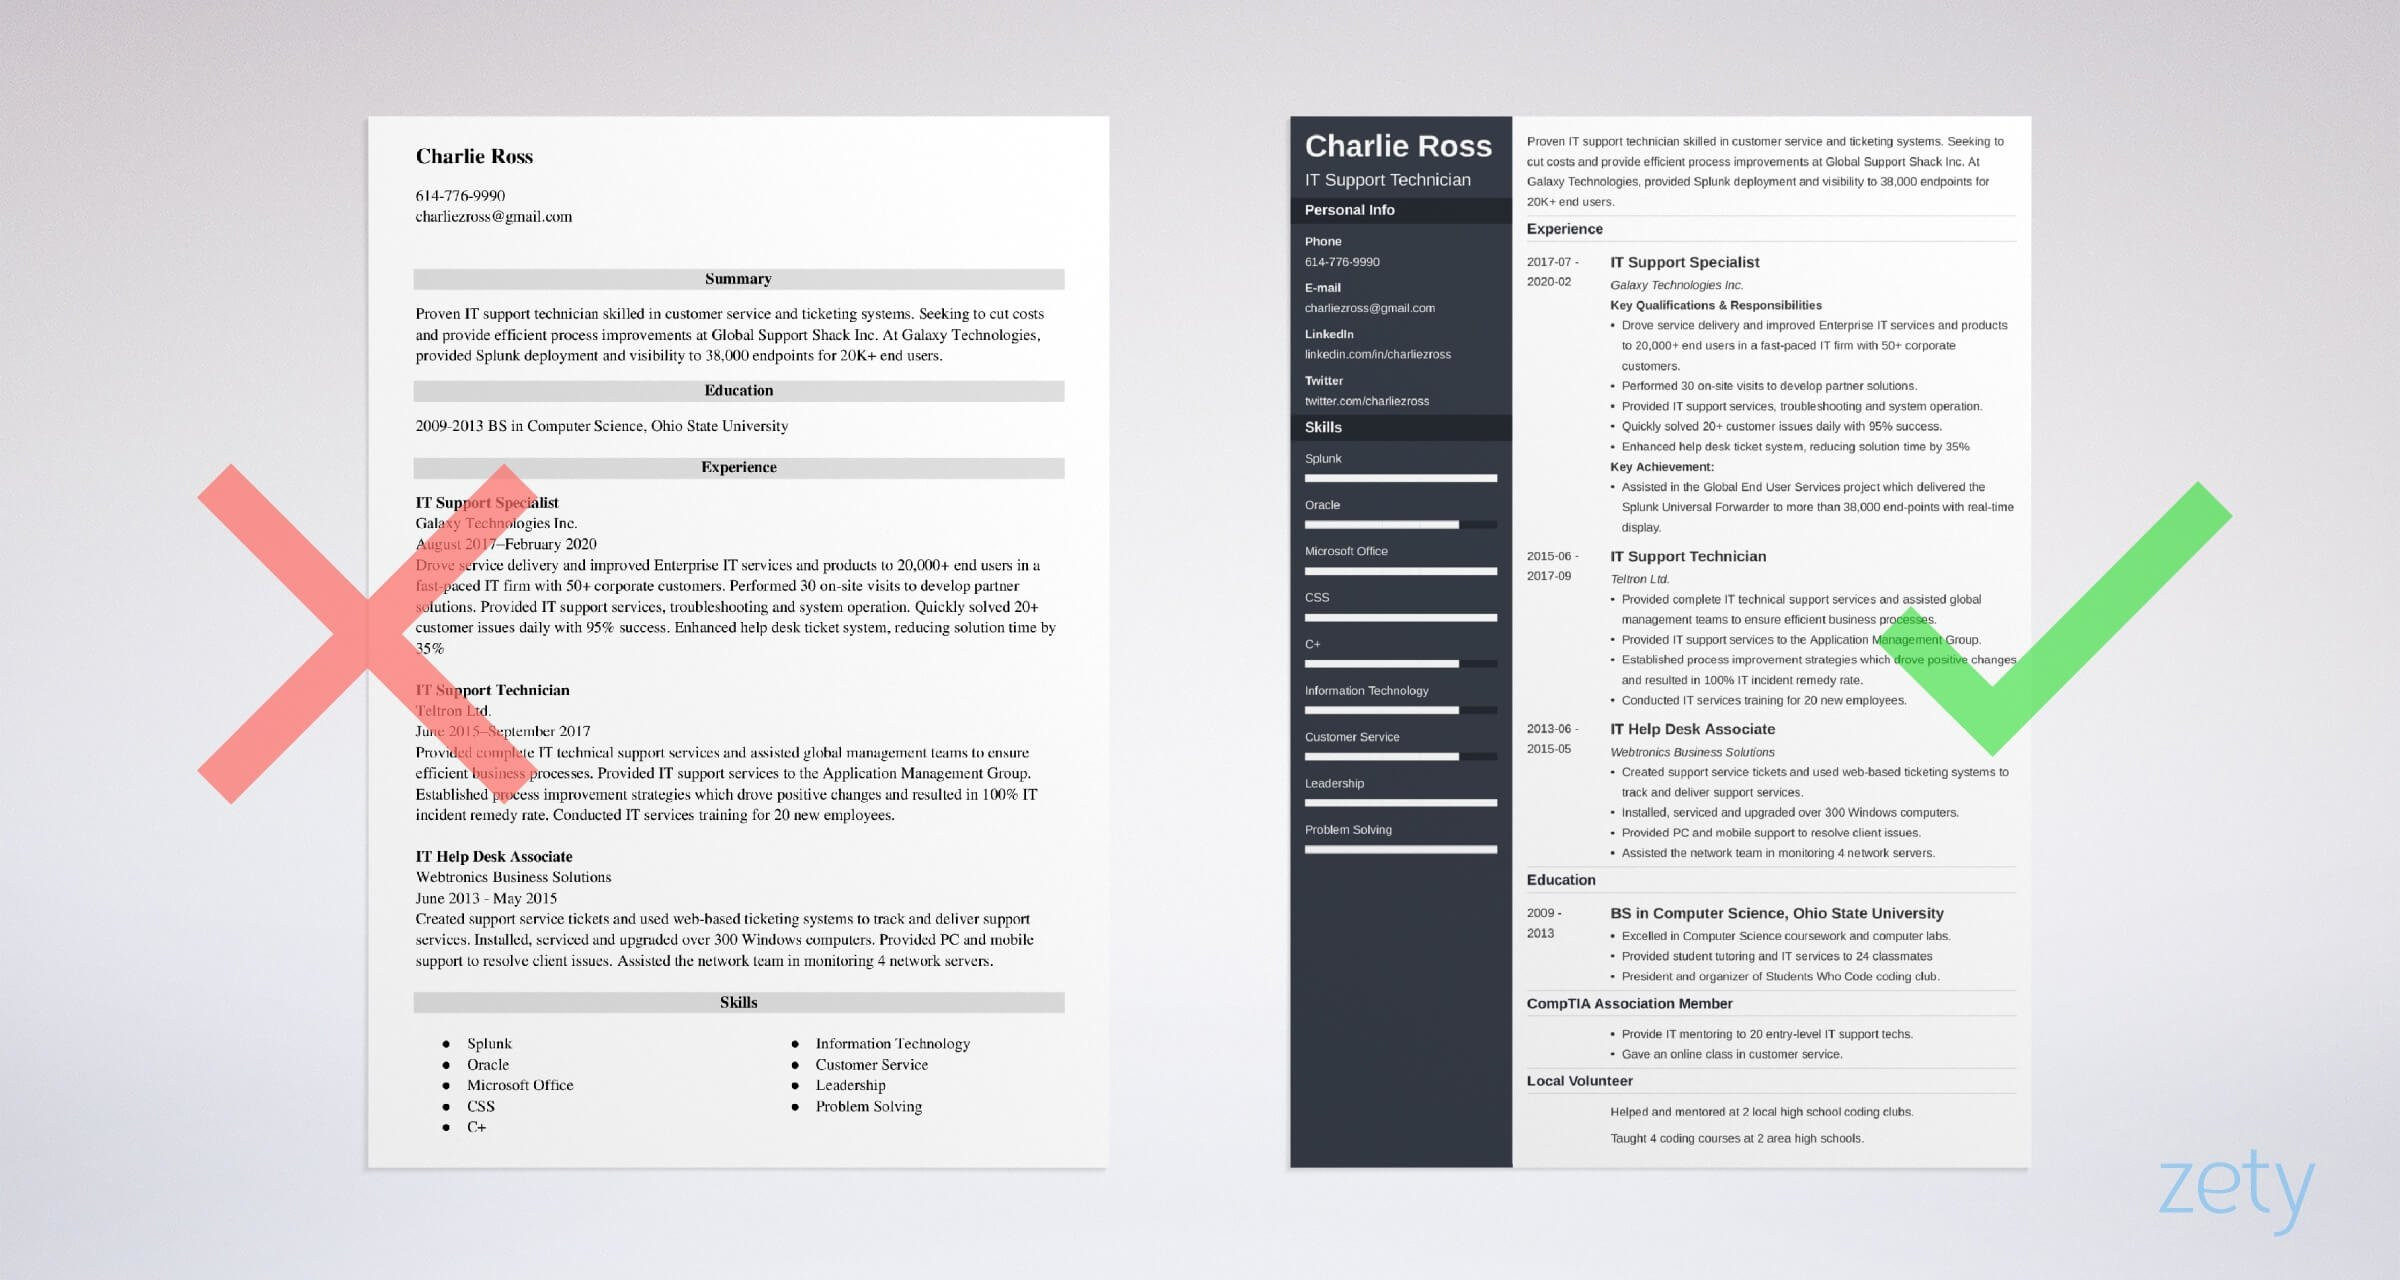 Customer Service Technical Support Sample Resume It Support Resume Examples (also for Help Desk & Technician)